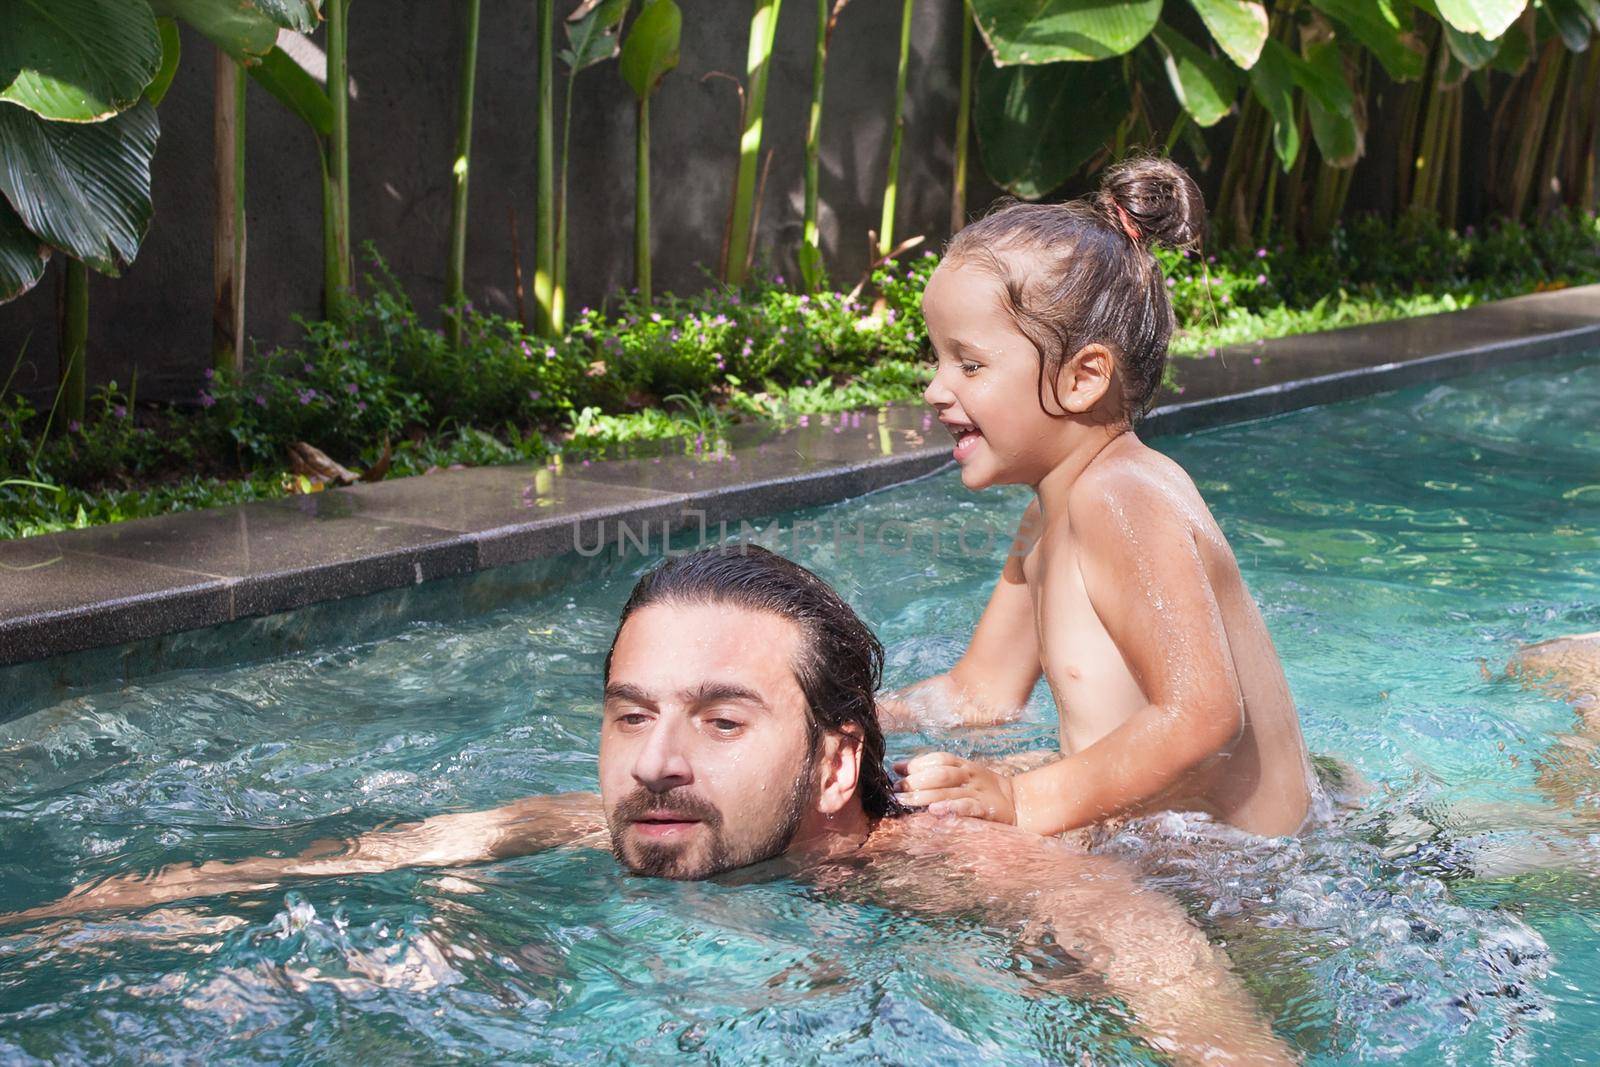 Happy family, active father with little child, adorable toddler daughter, having fun in swimming pool. by Jyliana